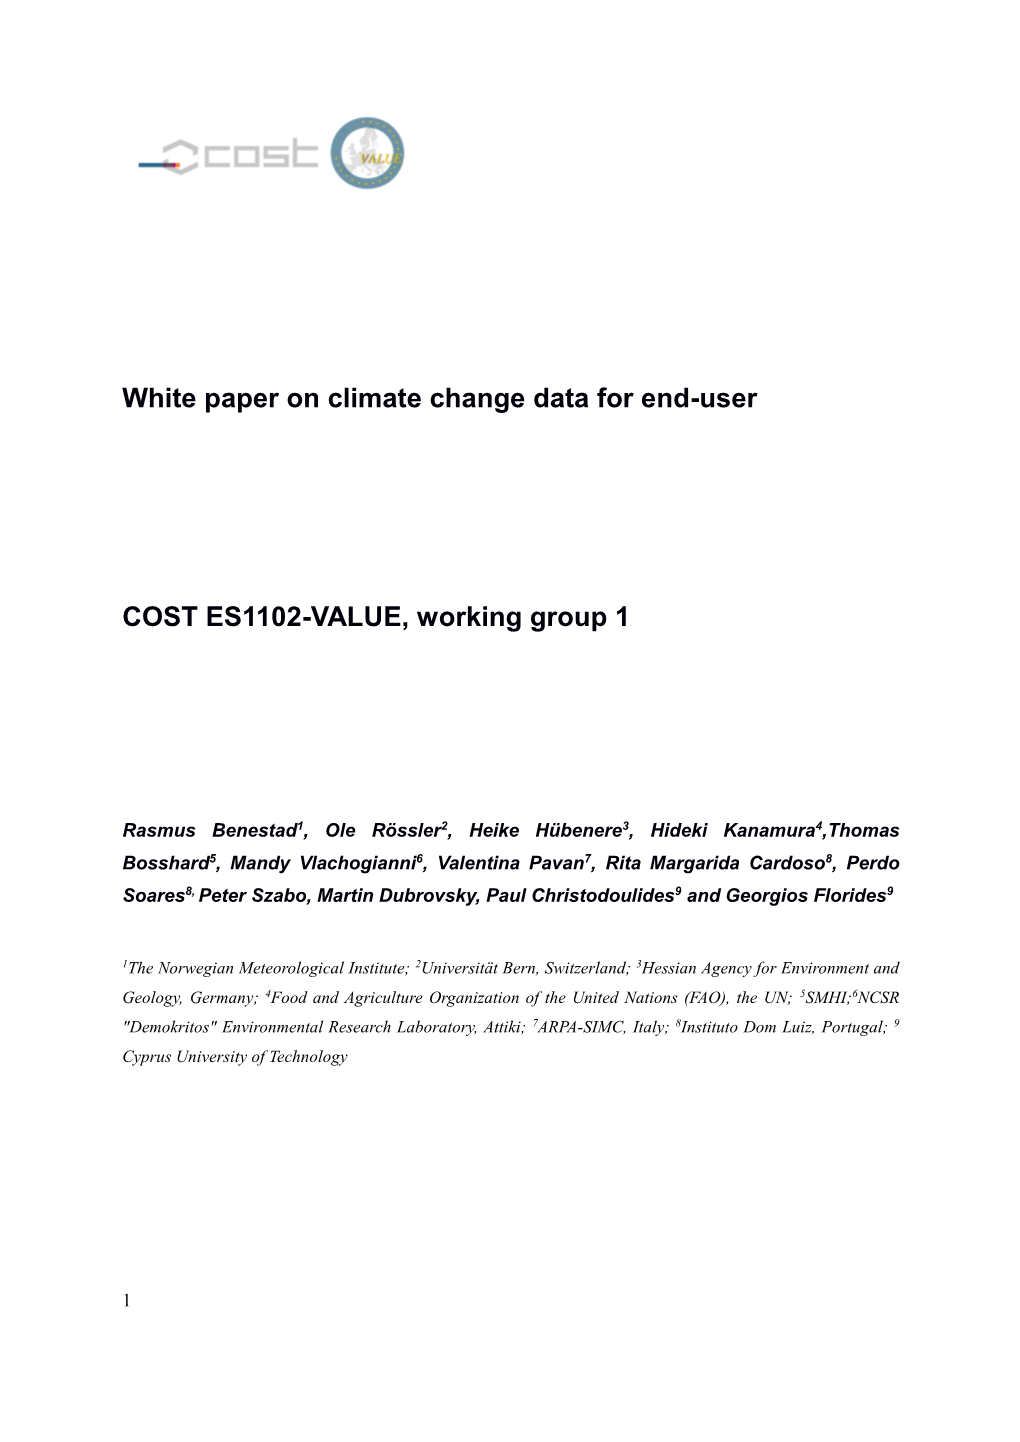 White Paper on Climate Change Data for End-User